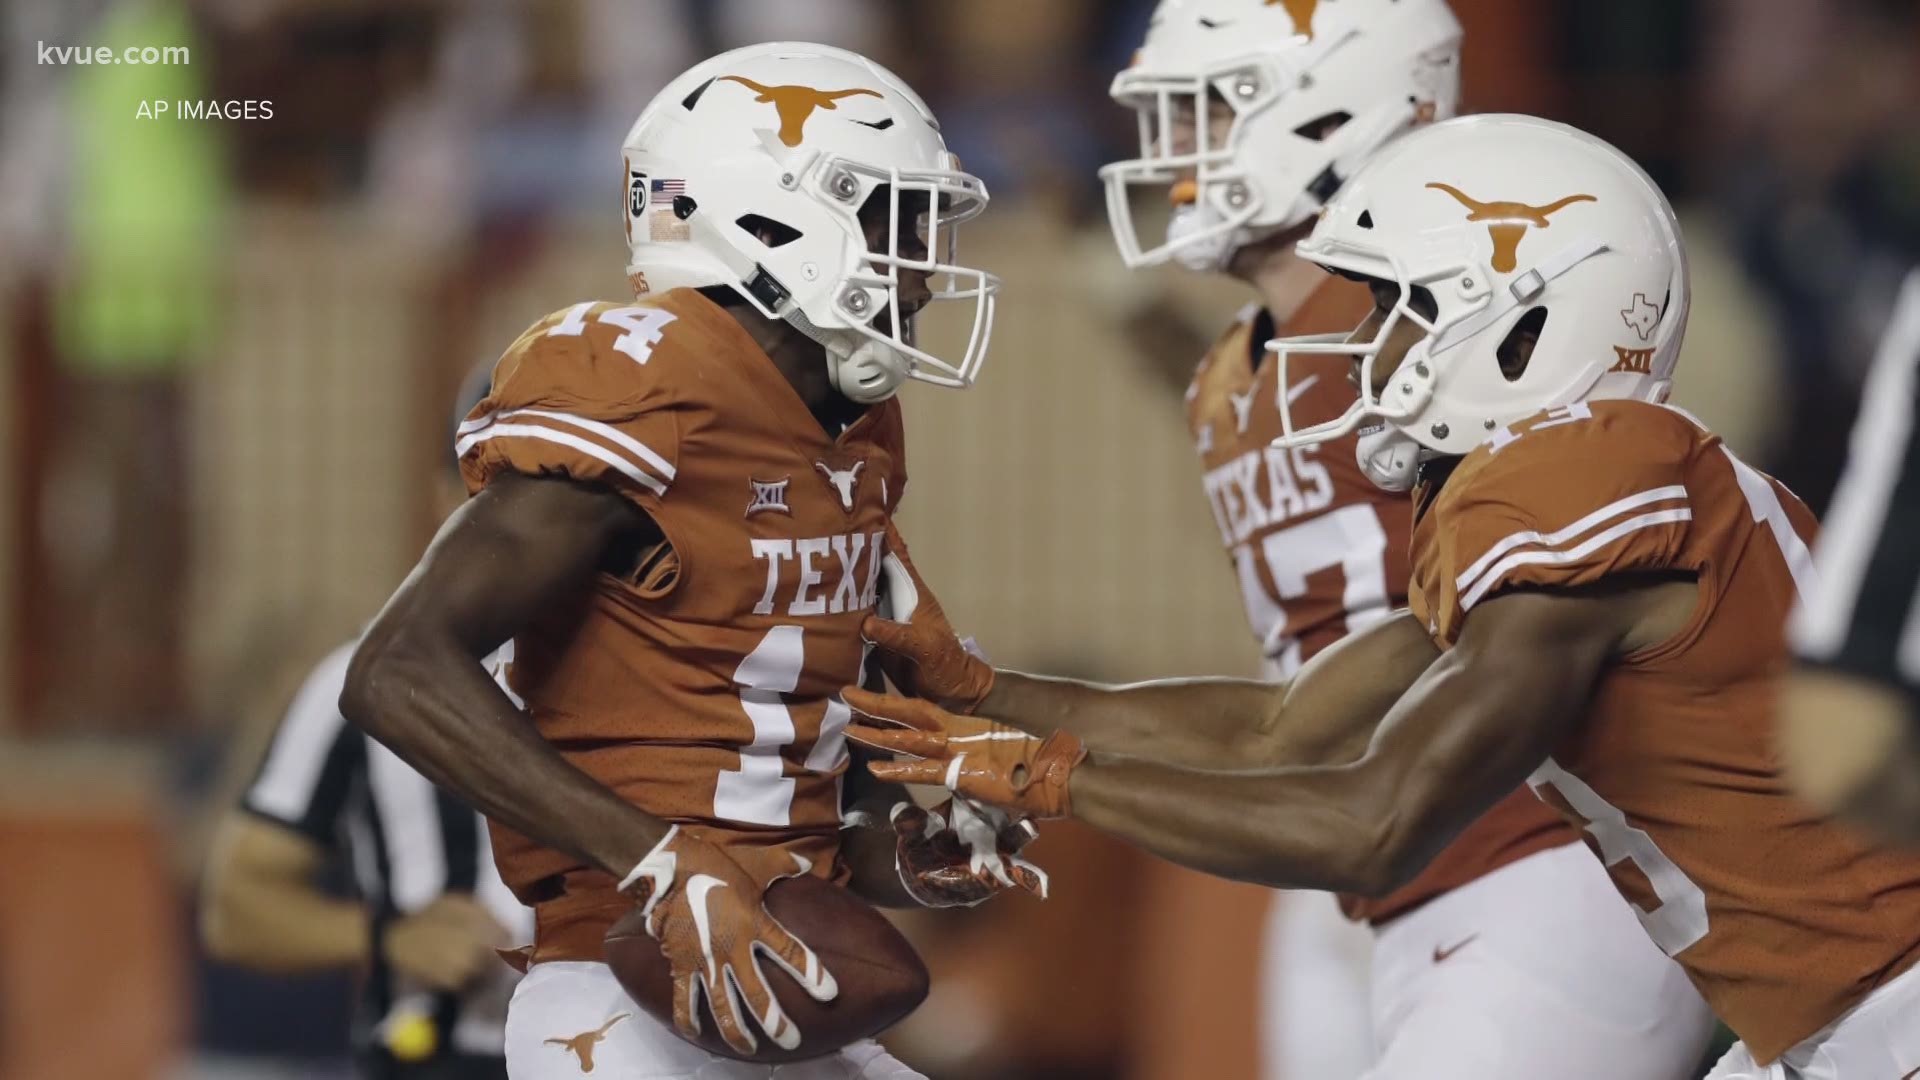 Josh Moore missed the 2019 season due to a suspension. But since then, the wide receiver's relationship with Head Coach Tom Herman has blossomed.